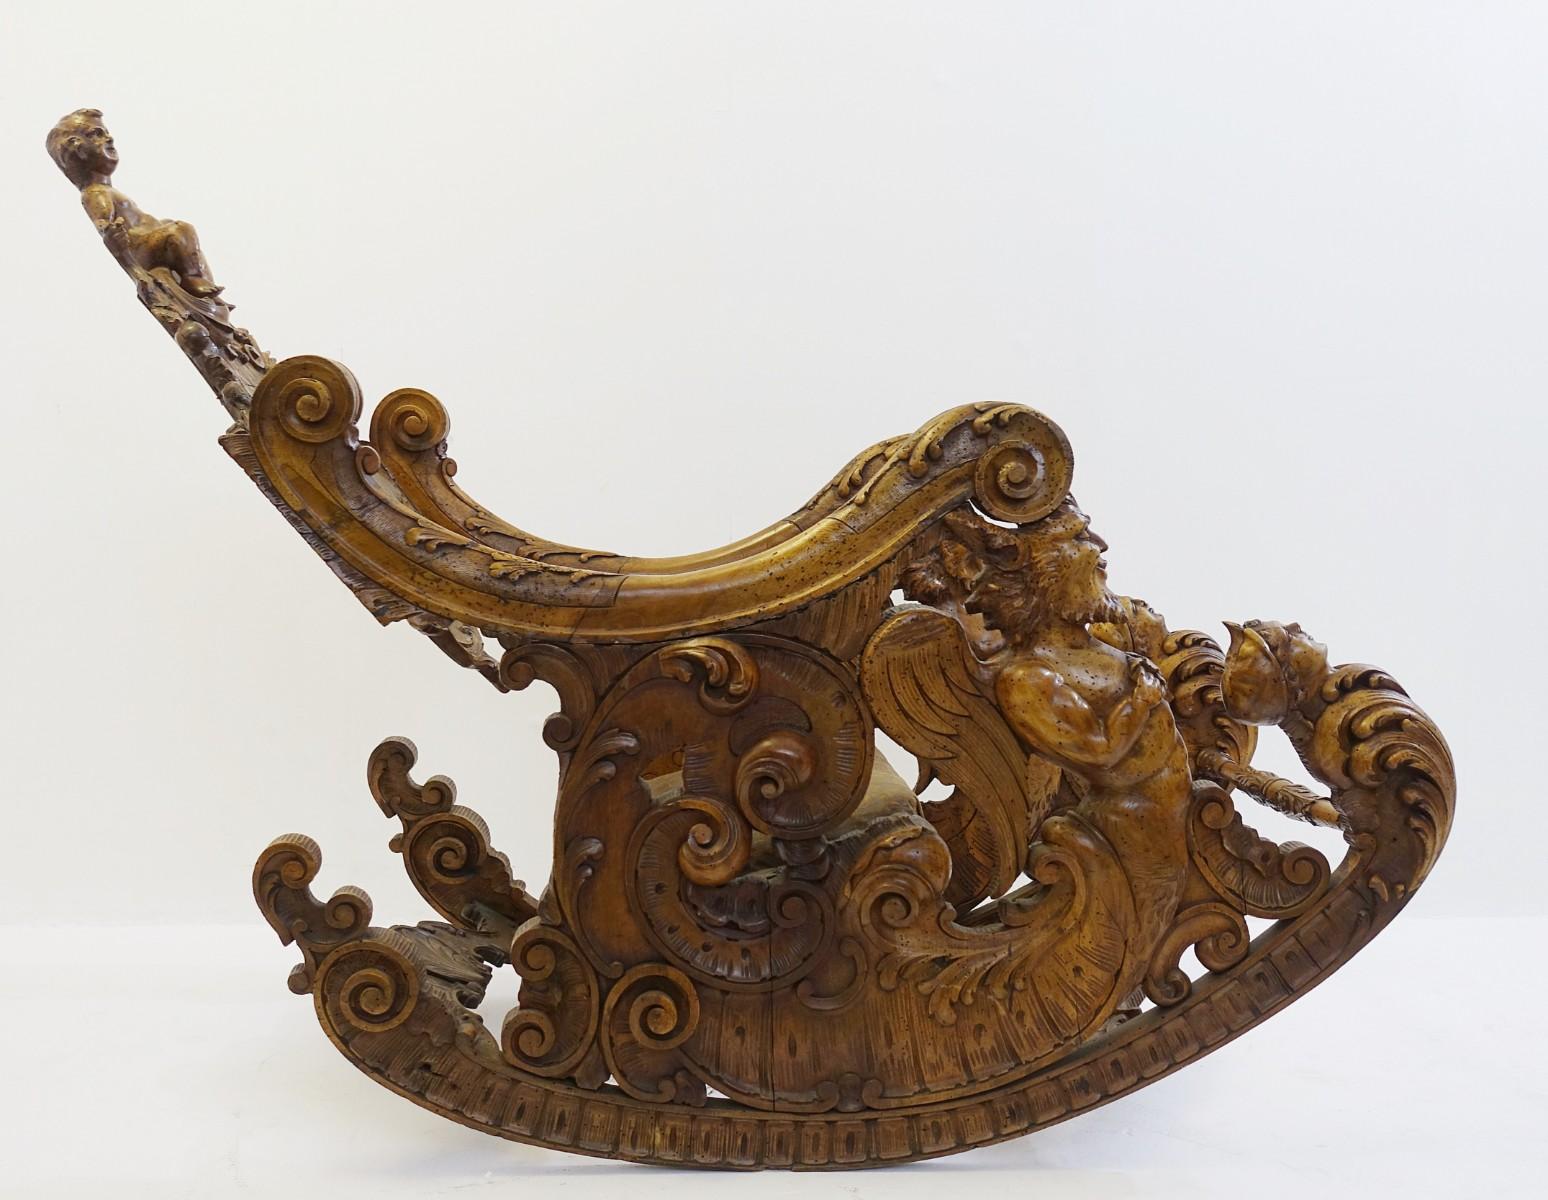 Rocking chair Baroque style, Germany, 19th century.